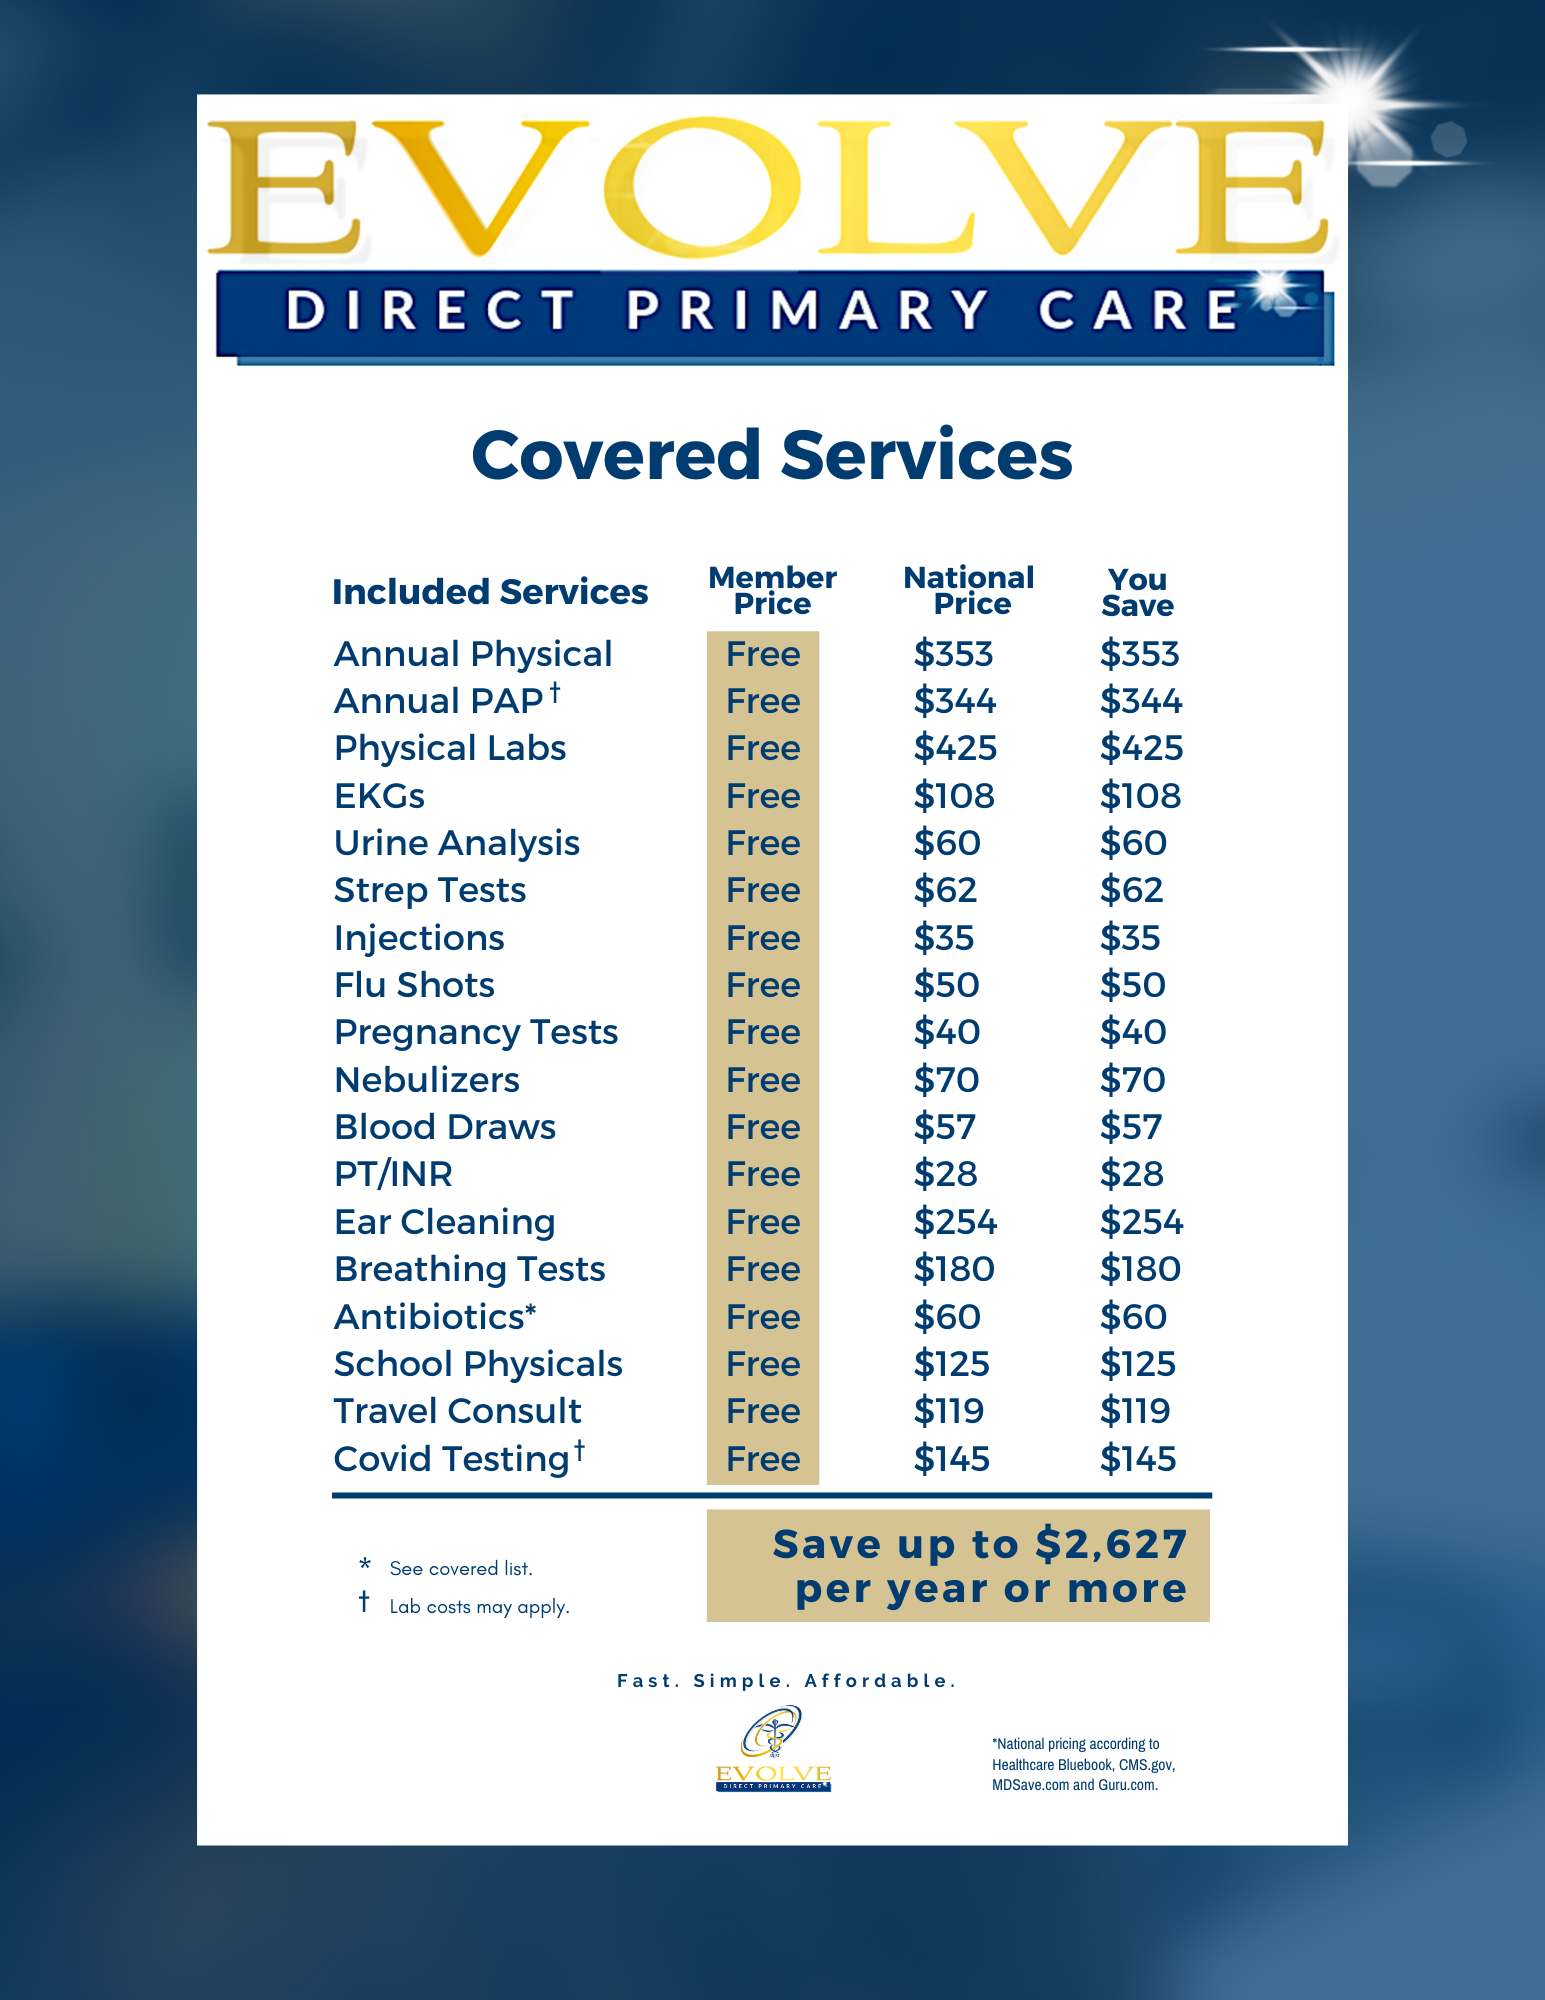 Evolve Direct Primary Care covered services